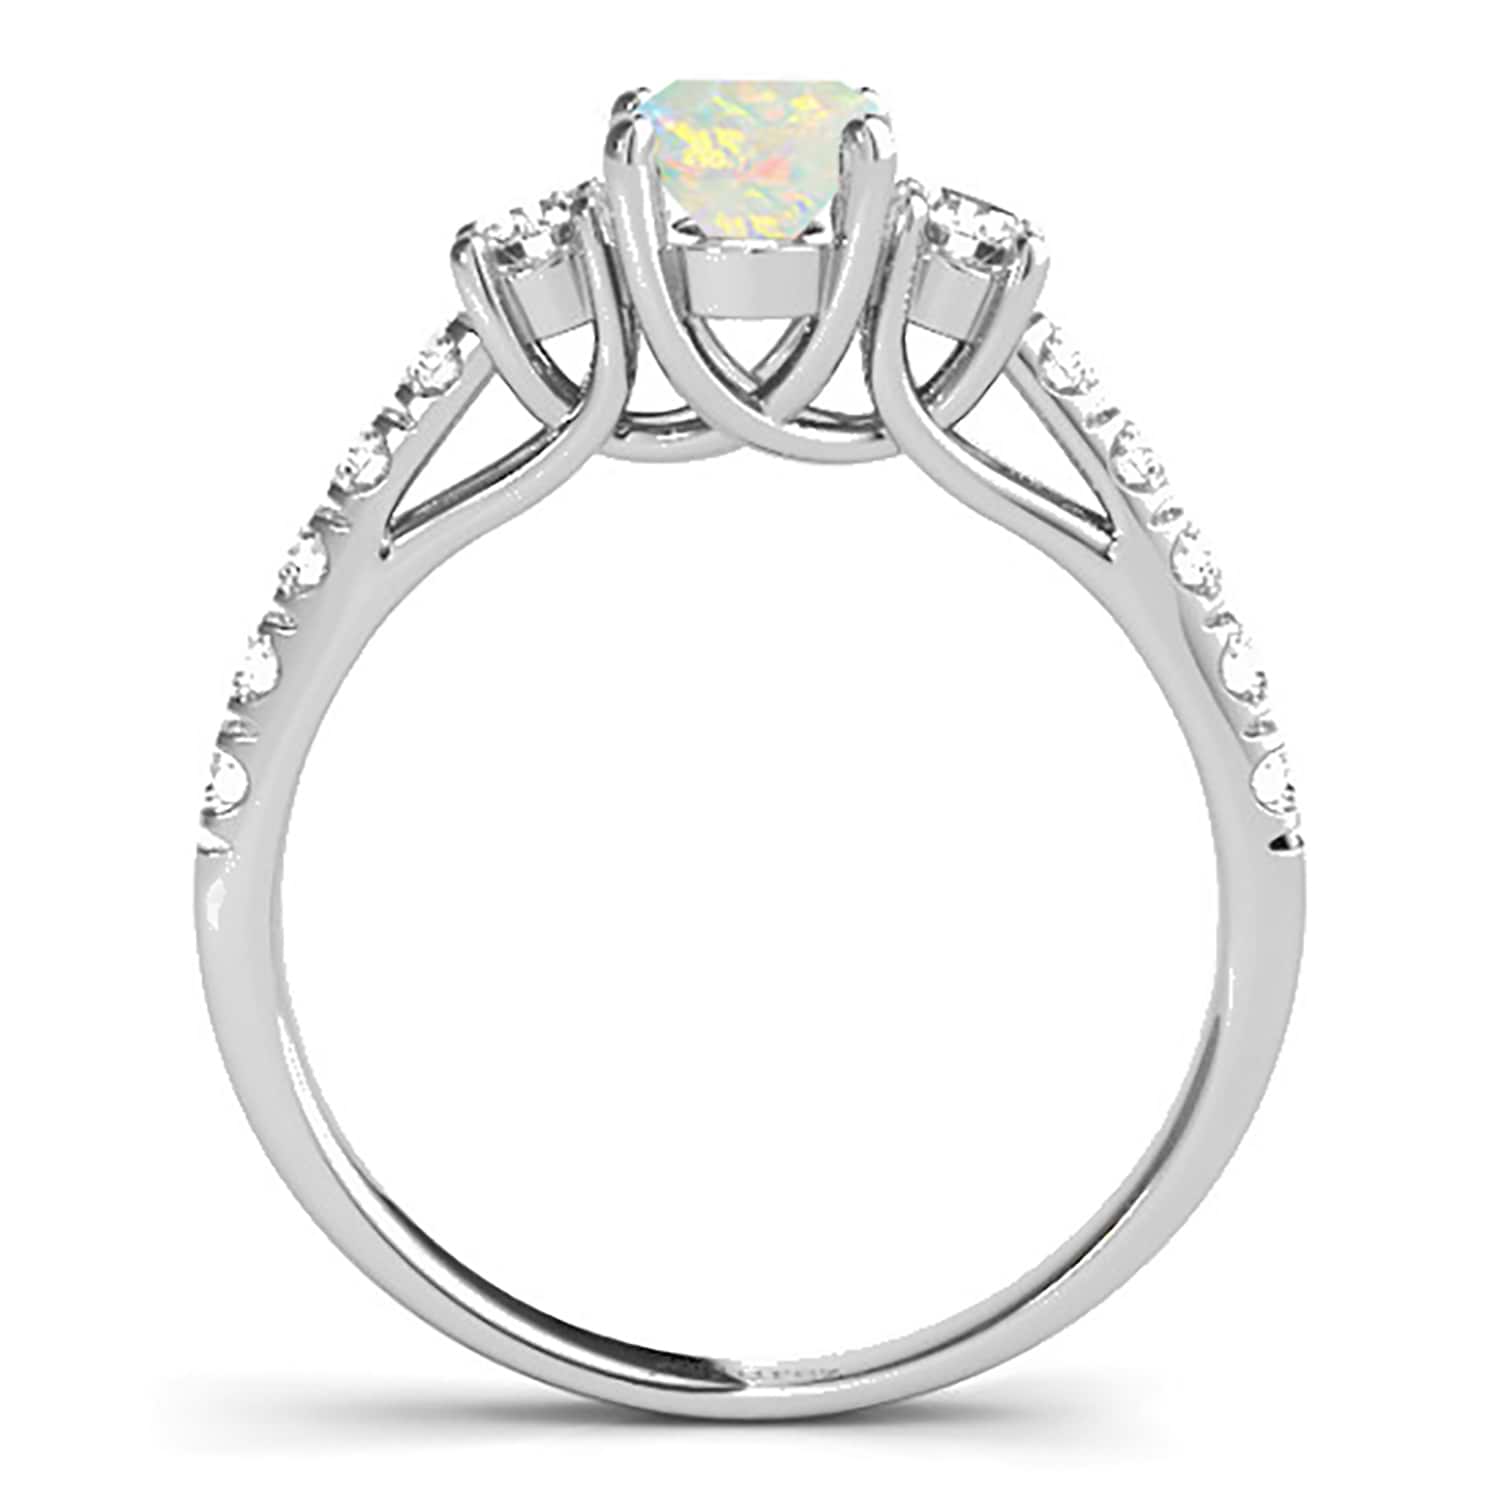 Oval Cut Opal & Diamond Engagement Ring 18k White Gold (1.40ct)